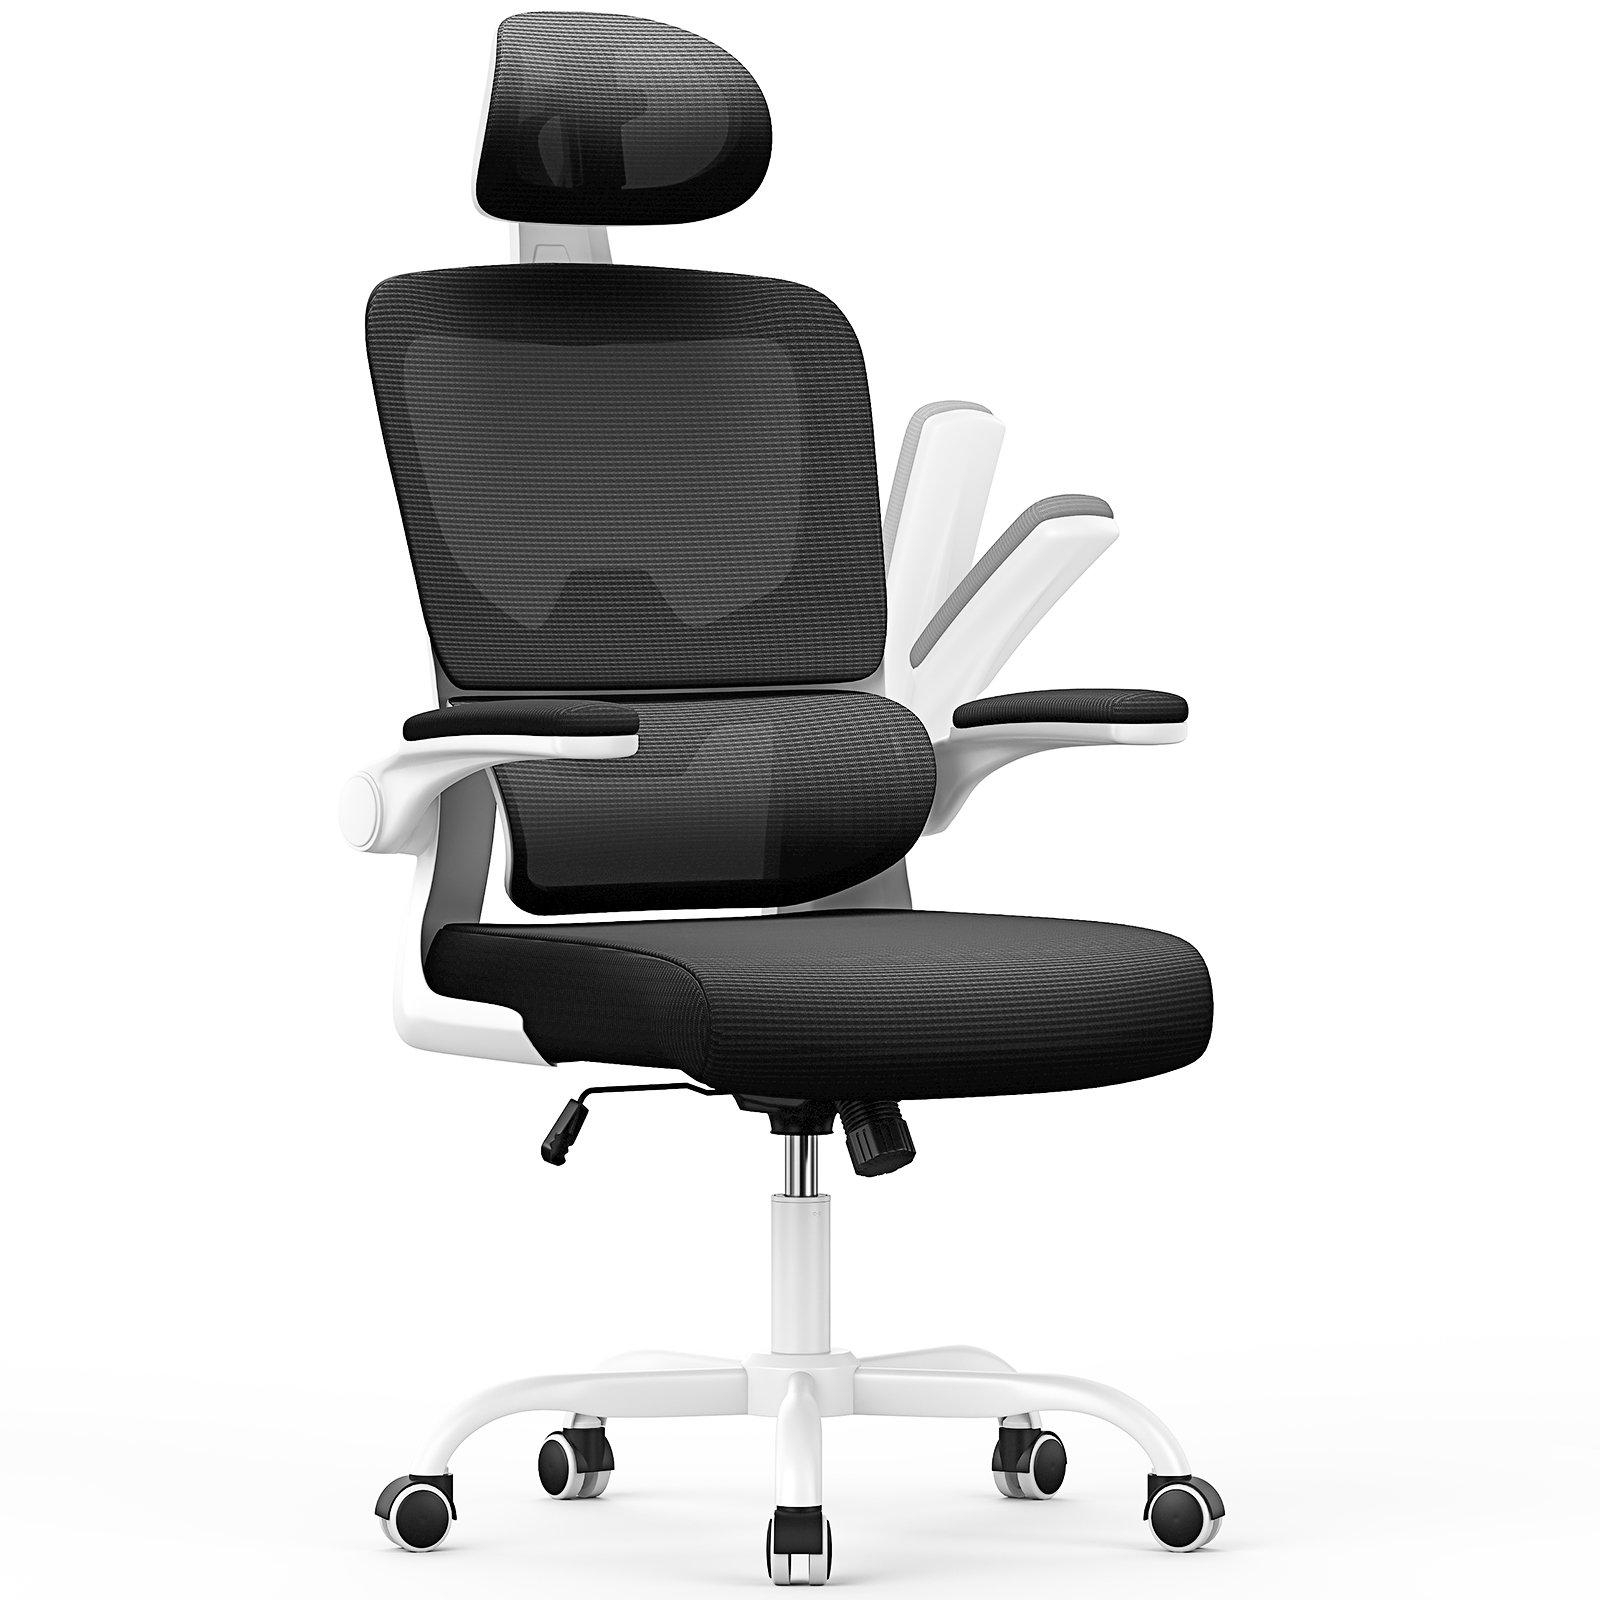 Large Ergonomic Desk Chairs,High Back Computer Chair with Lumbar Support, Breathable Mesh, Adjustabl